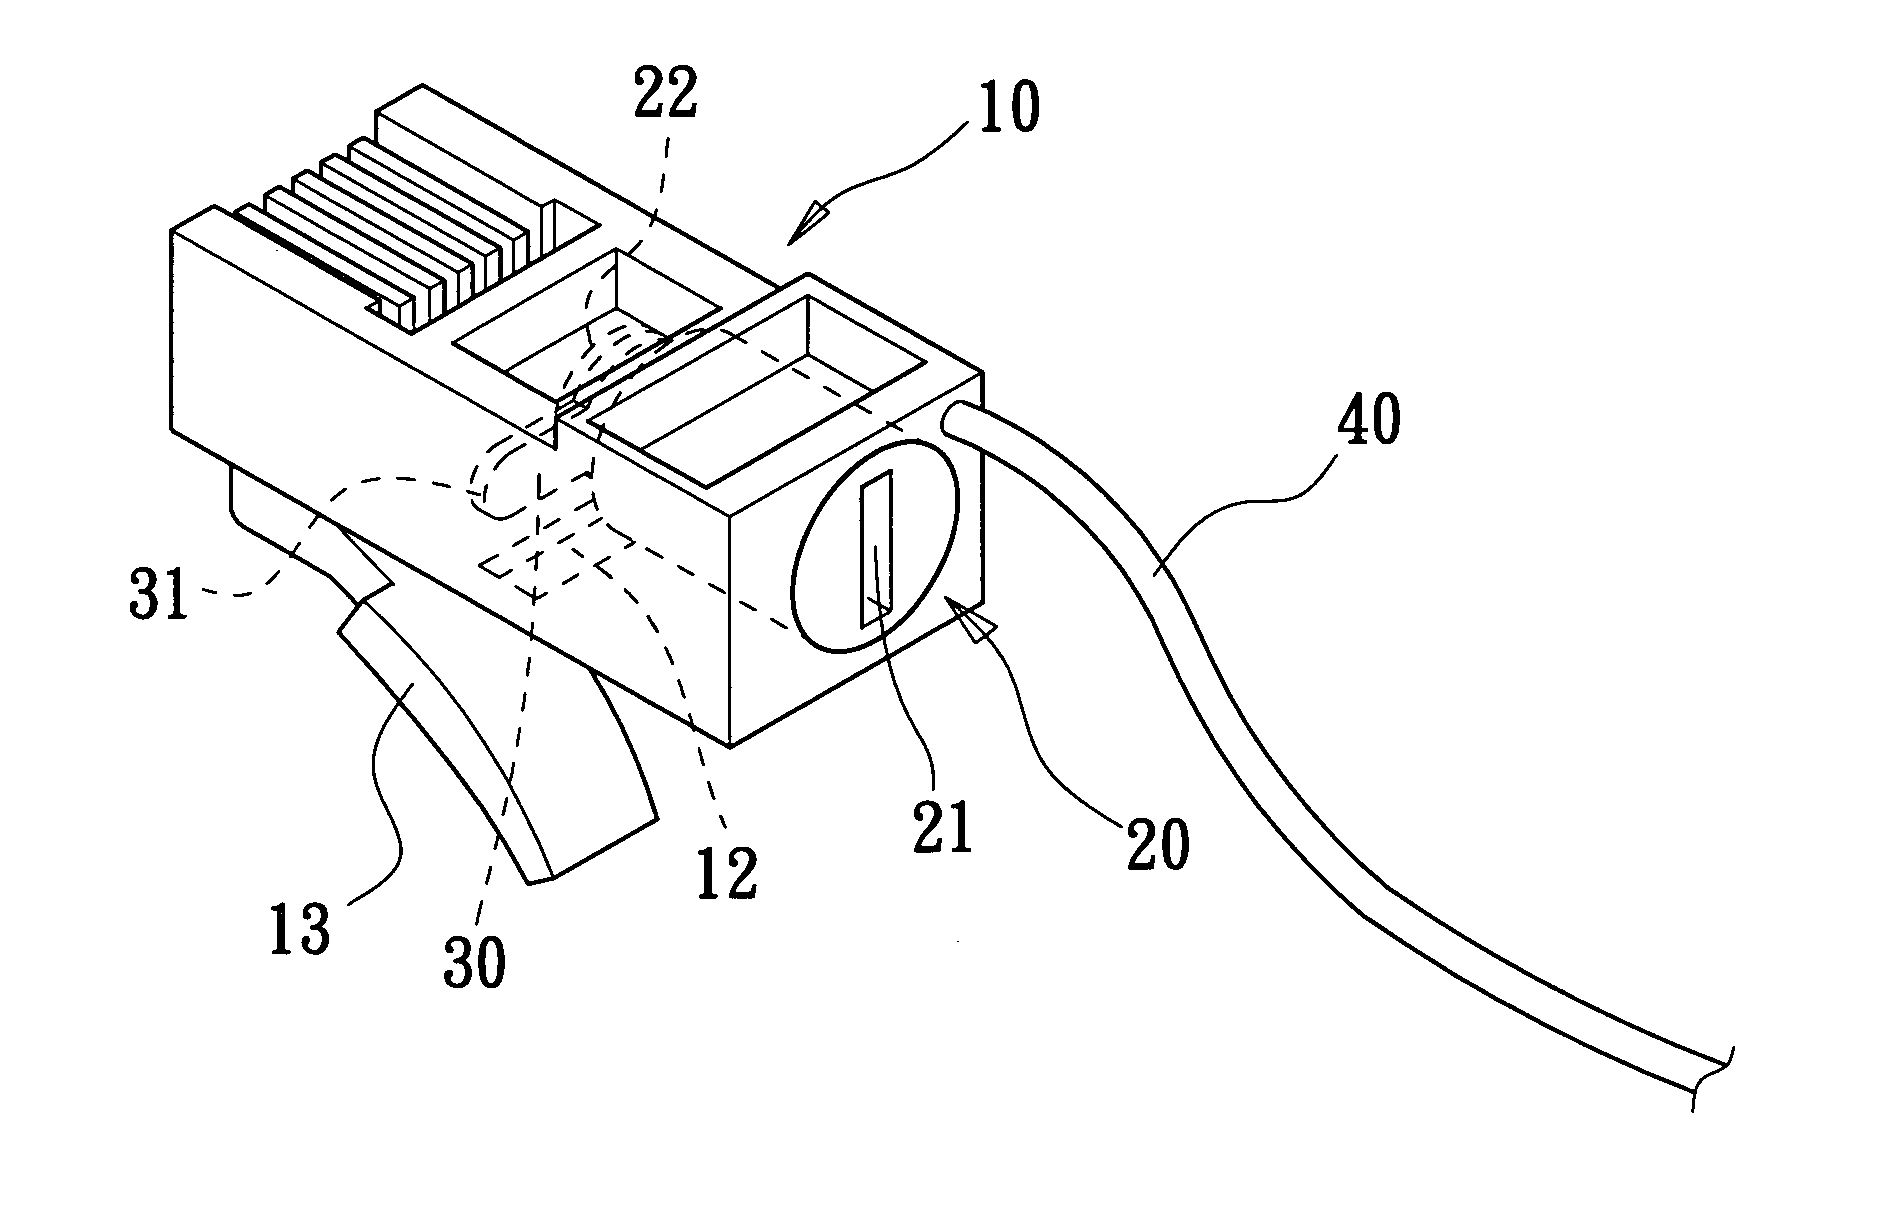 Phone plug structure with a locking function